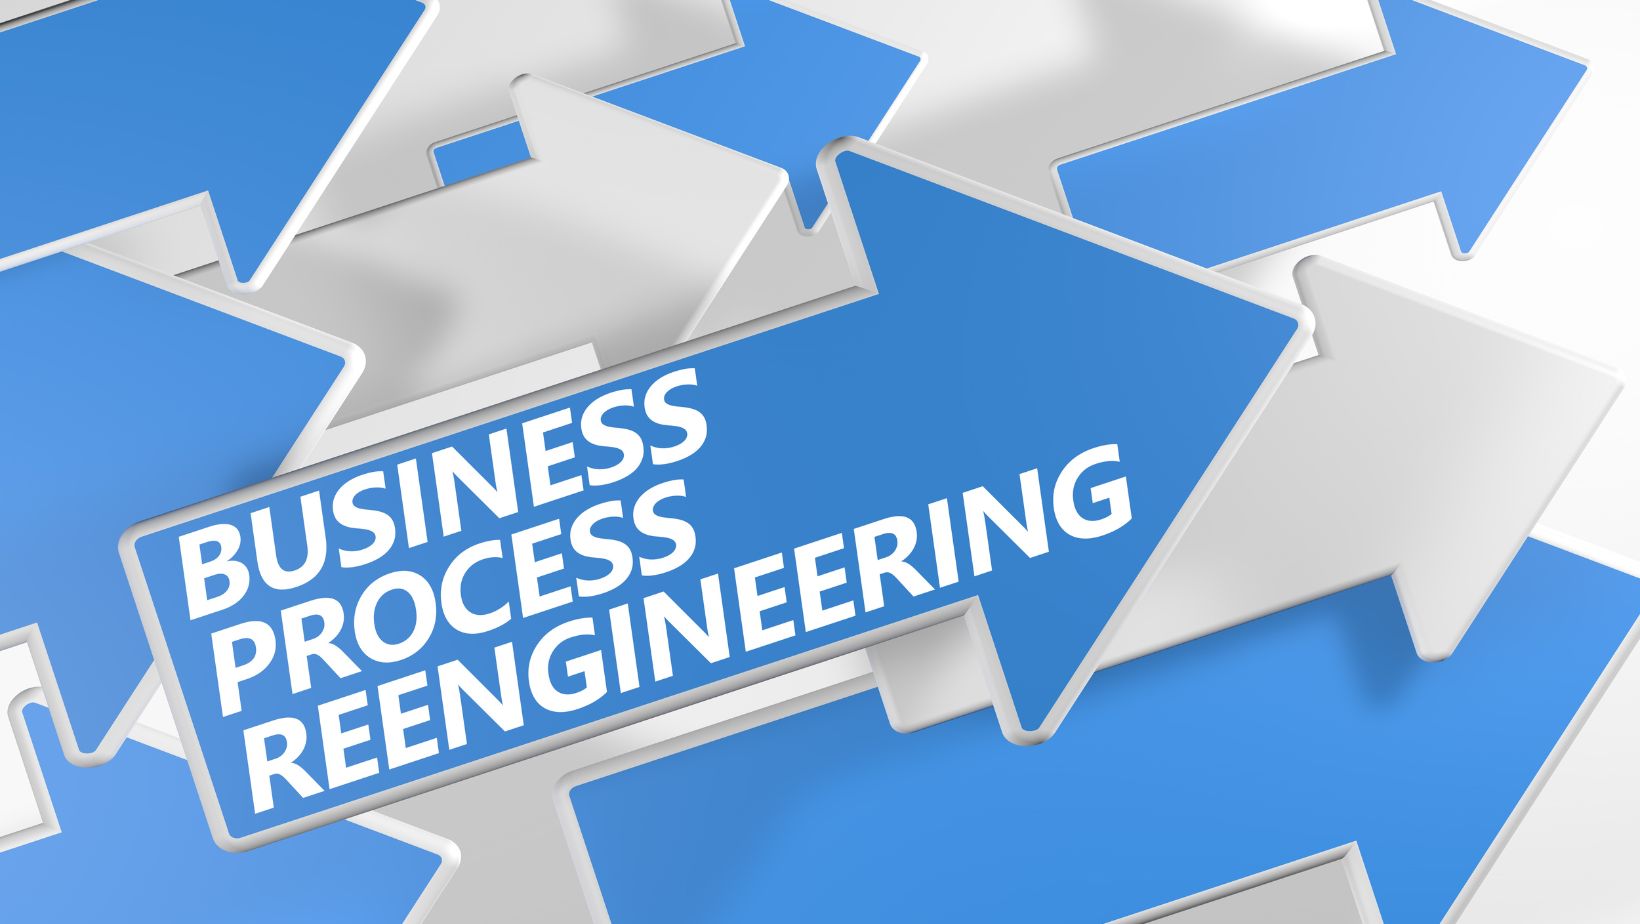 a sponsor proposes research to evaluate reengineering